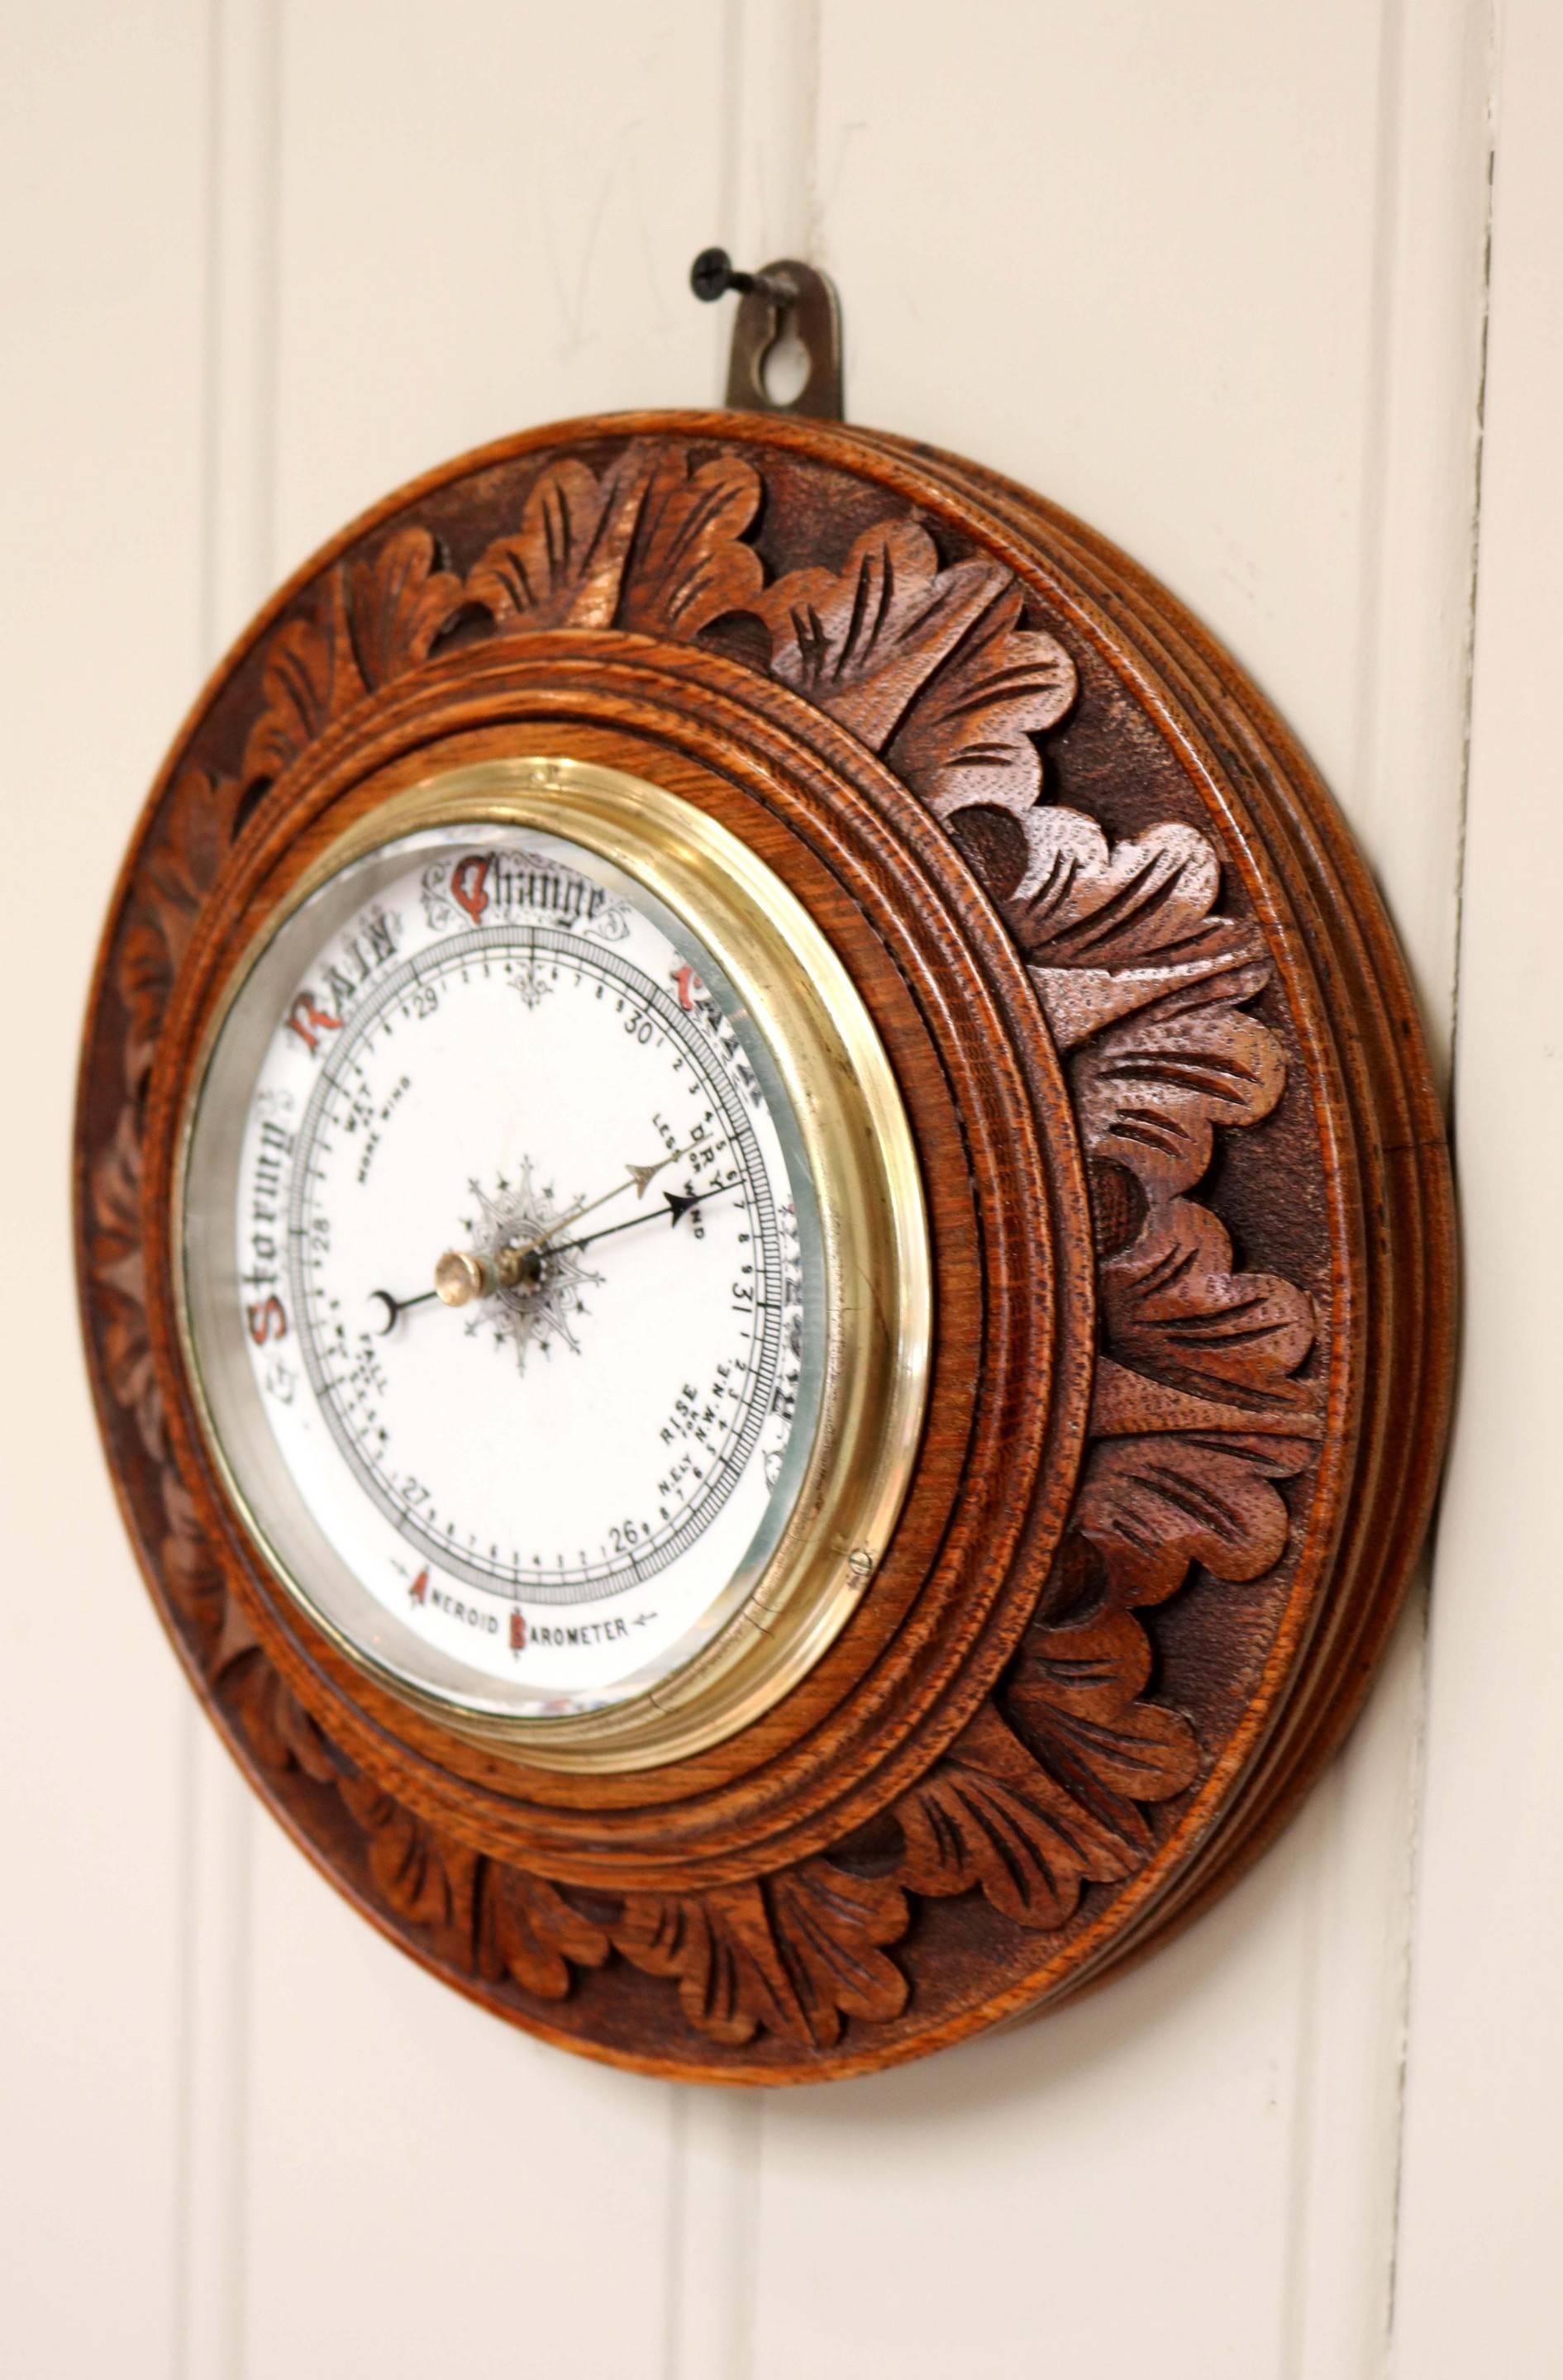 Edwardian carved oak circular barometer having a ceramic dial with hand-painted scale and lettering with an aneroid movement.